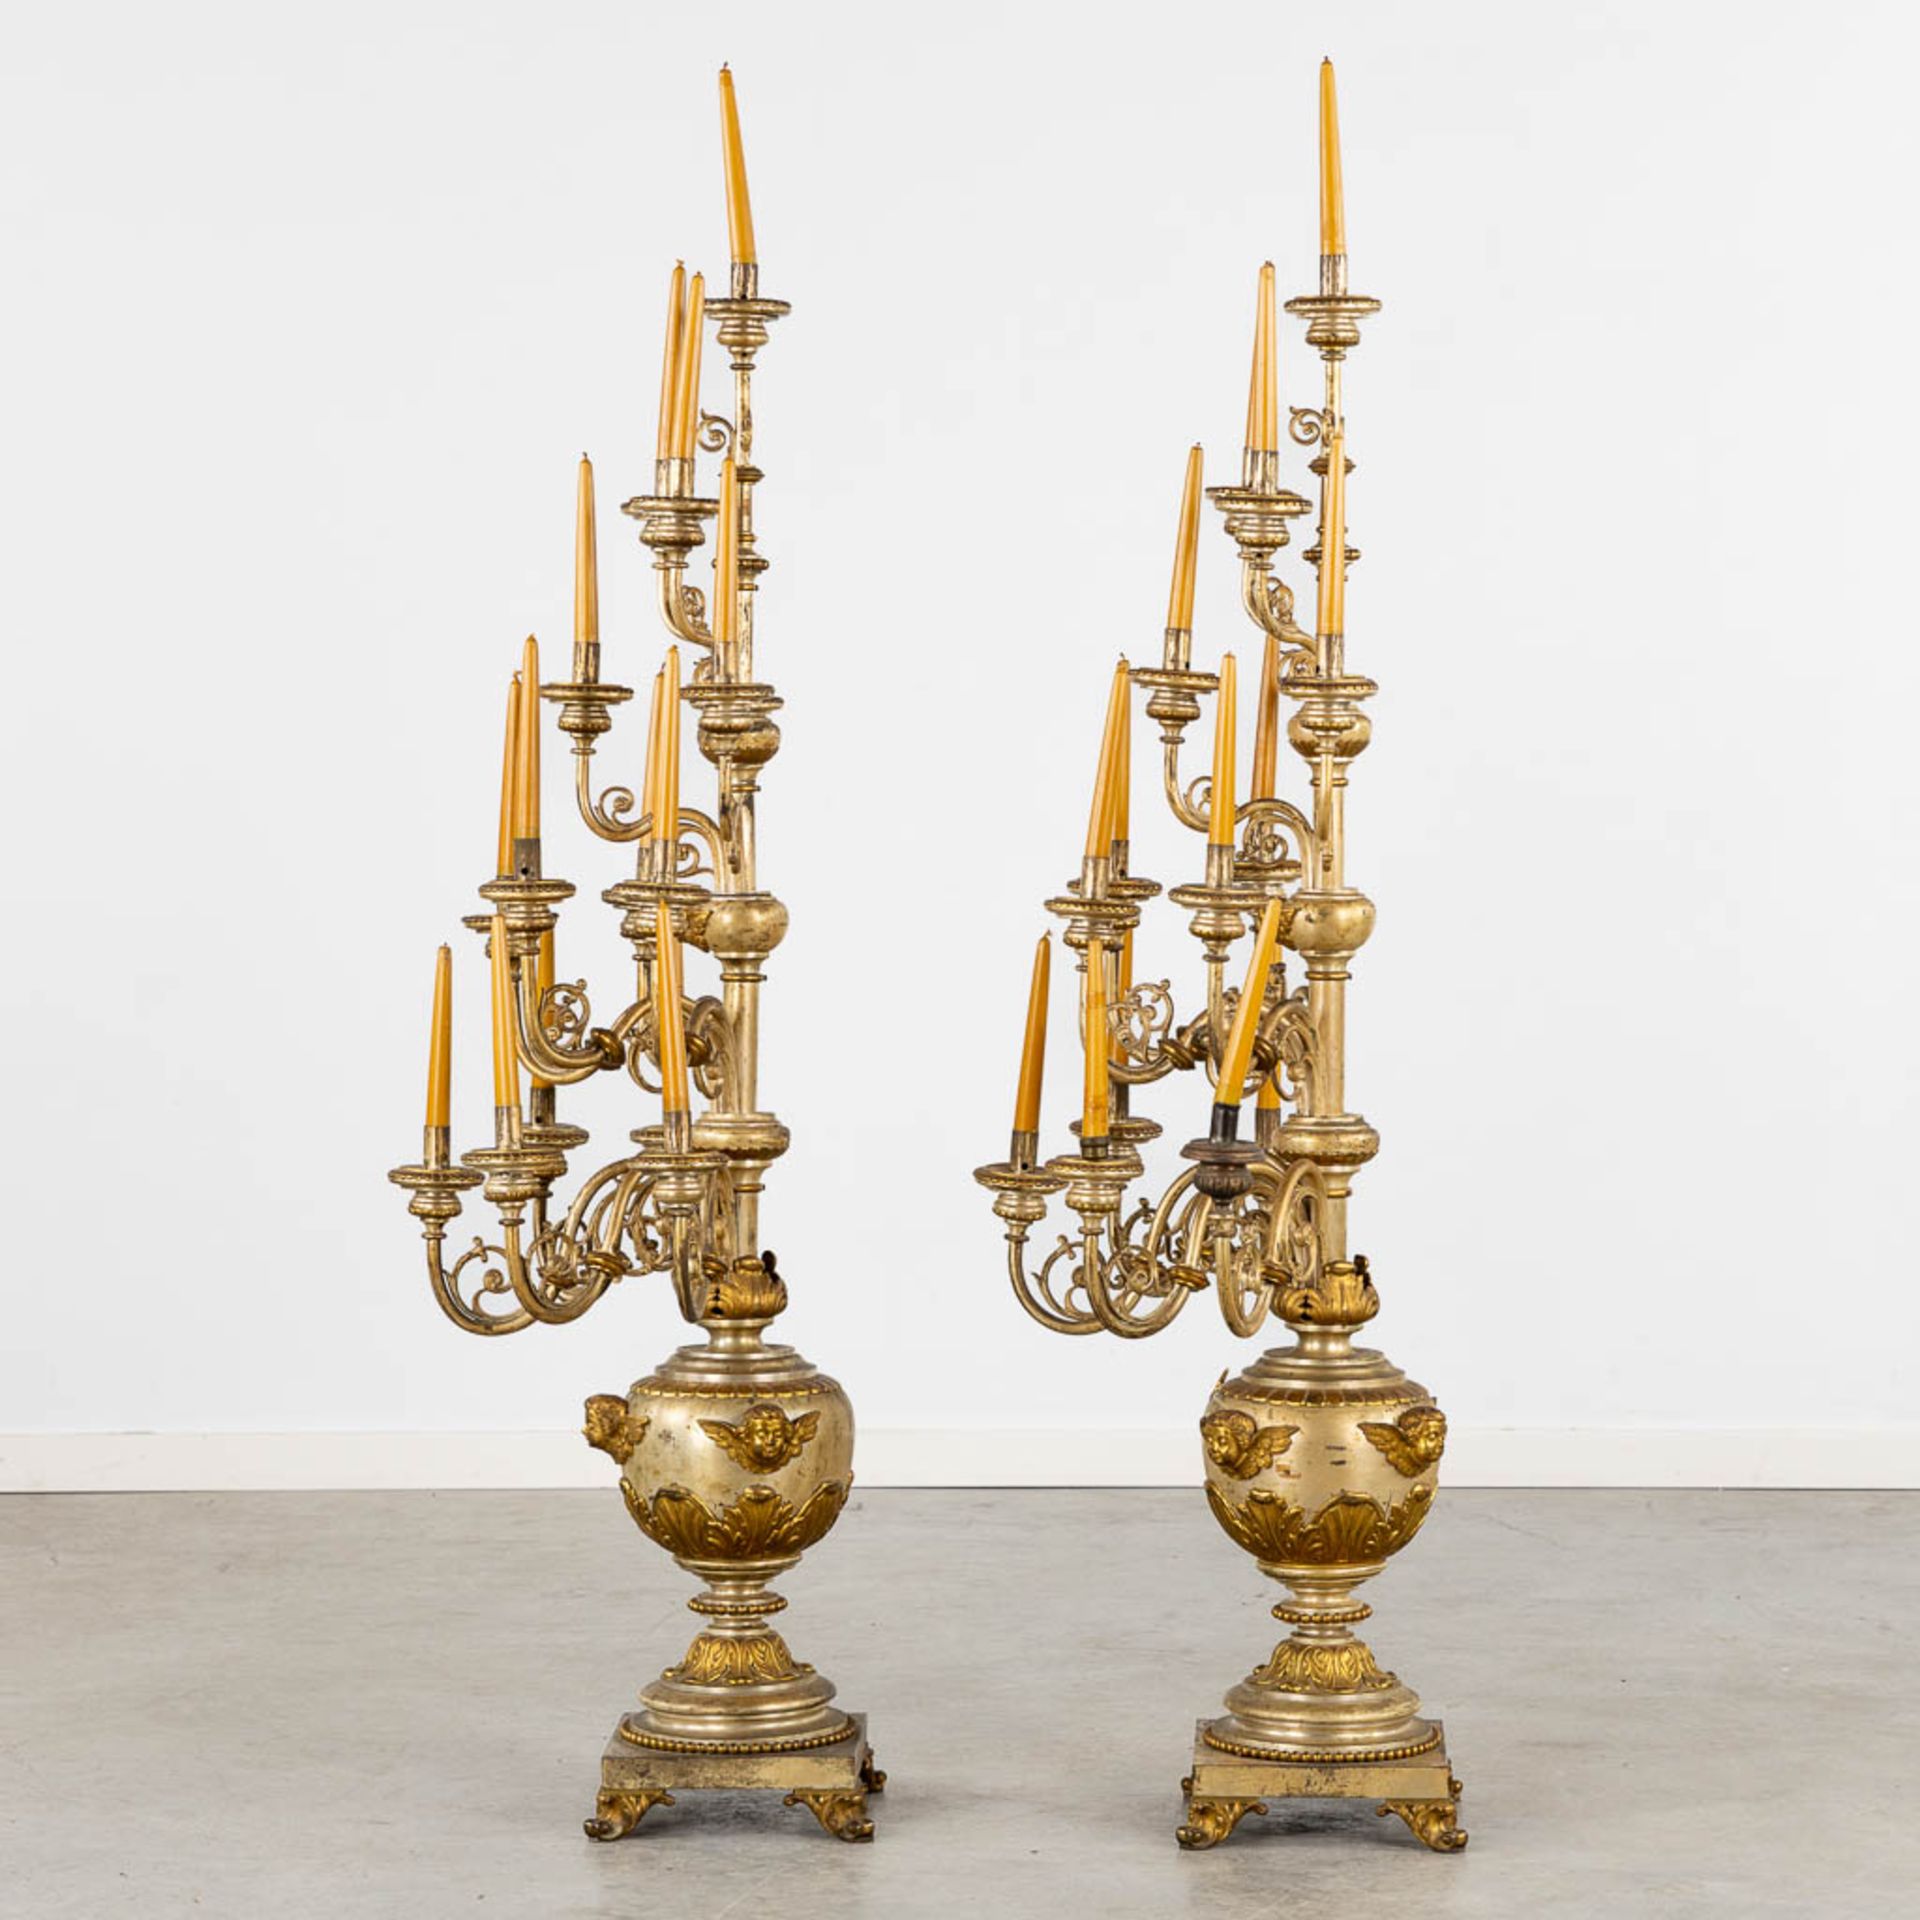 An impressive pair of candelabra, 15 candles, gold and silver-plated metal. (L:44 x W:60 x H:138 cm) - Image 4 of 12